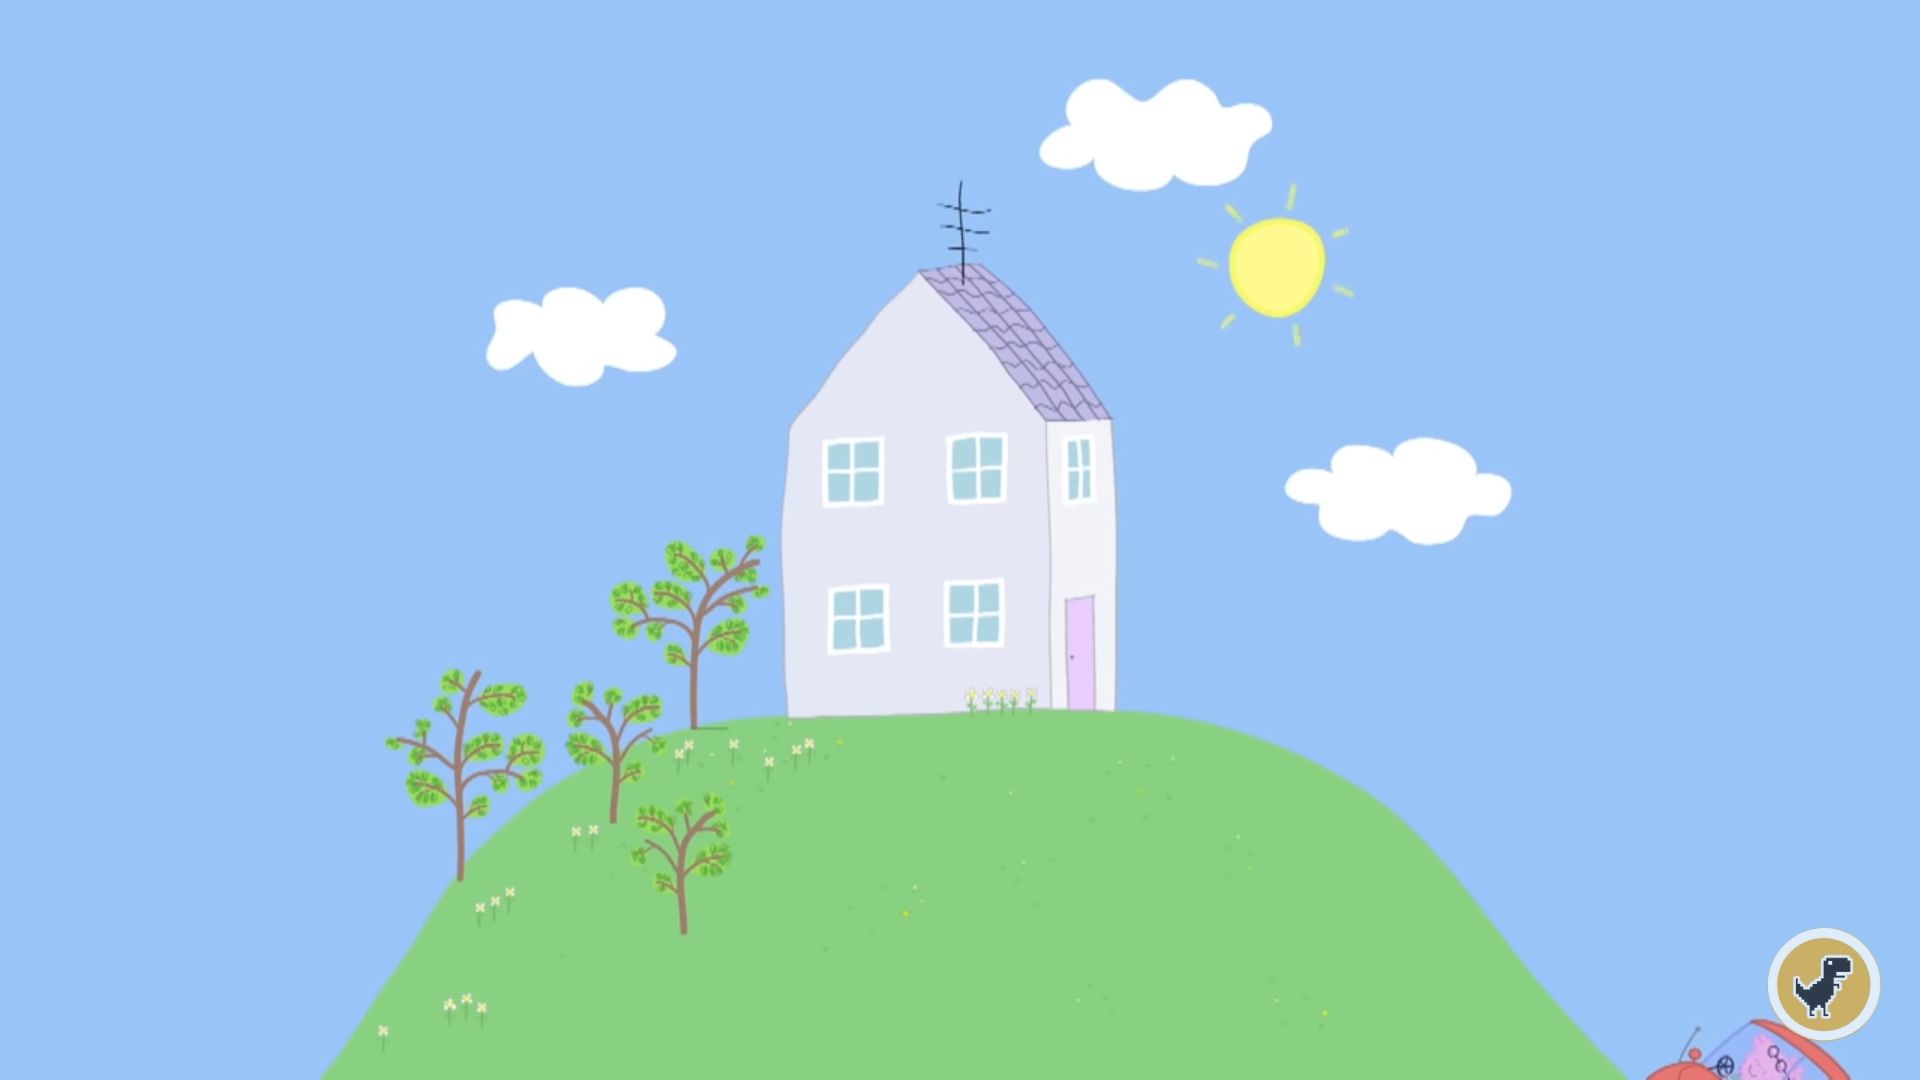 Peppa Pig House Wallpapers Wallpaper Cave